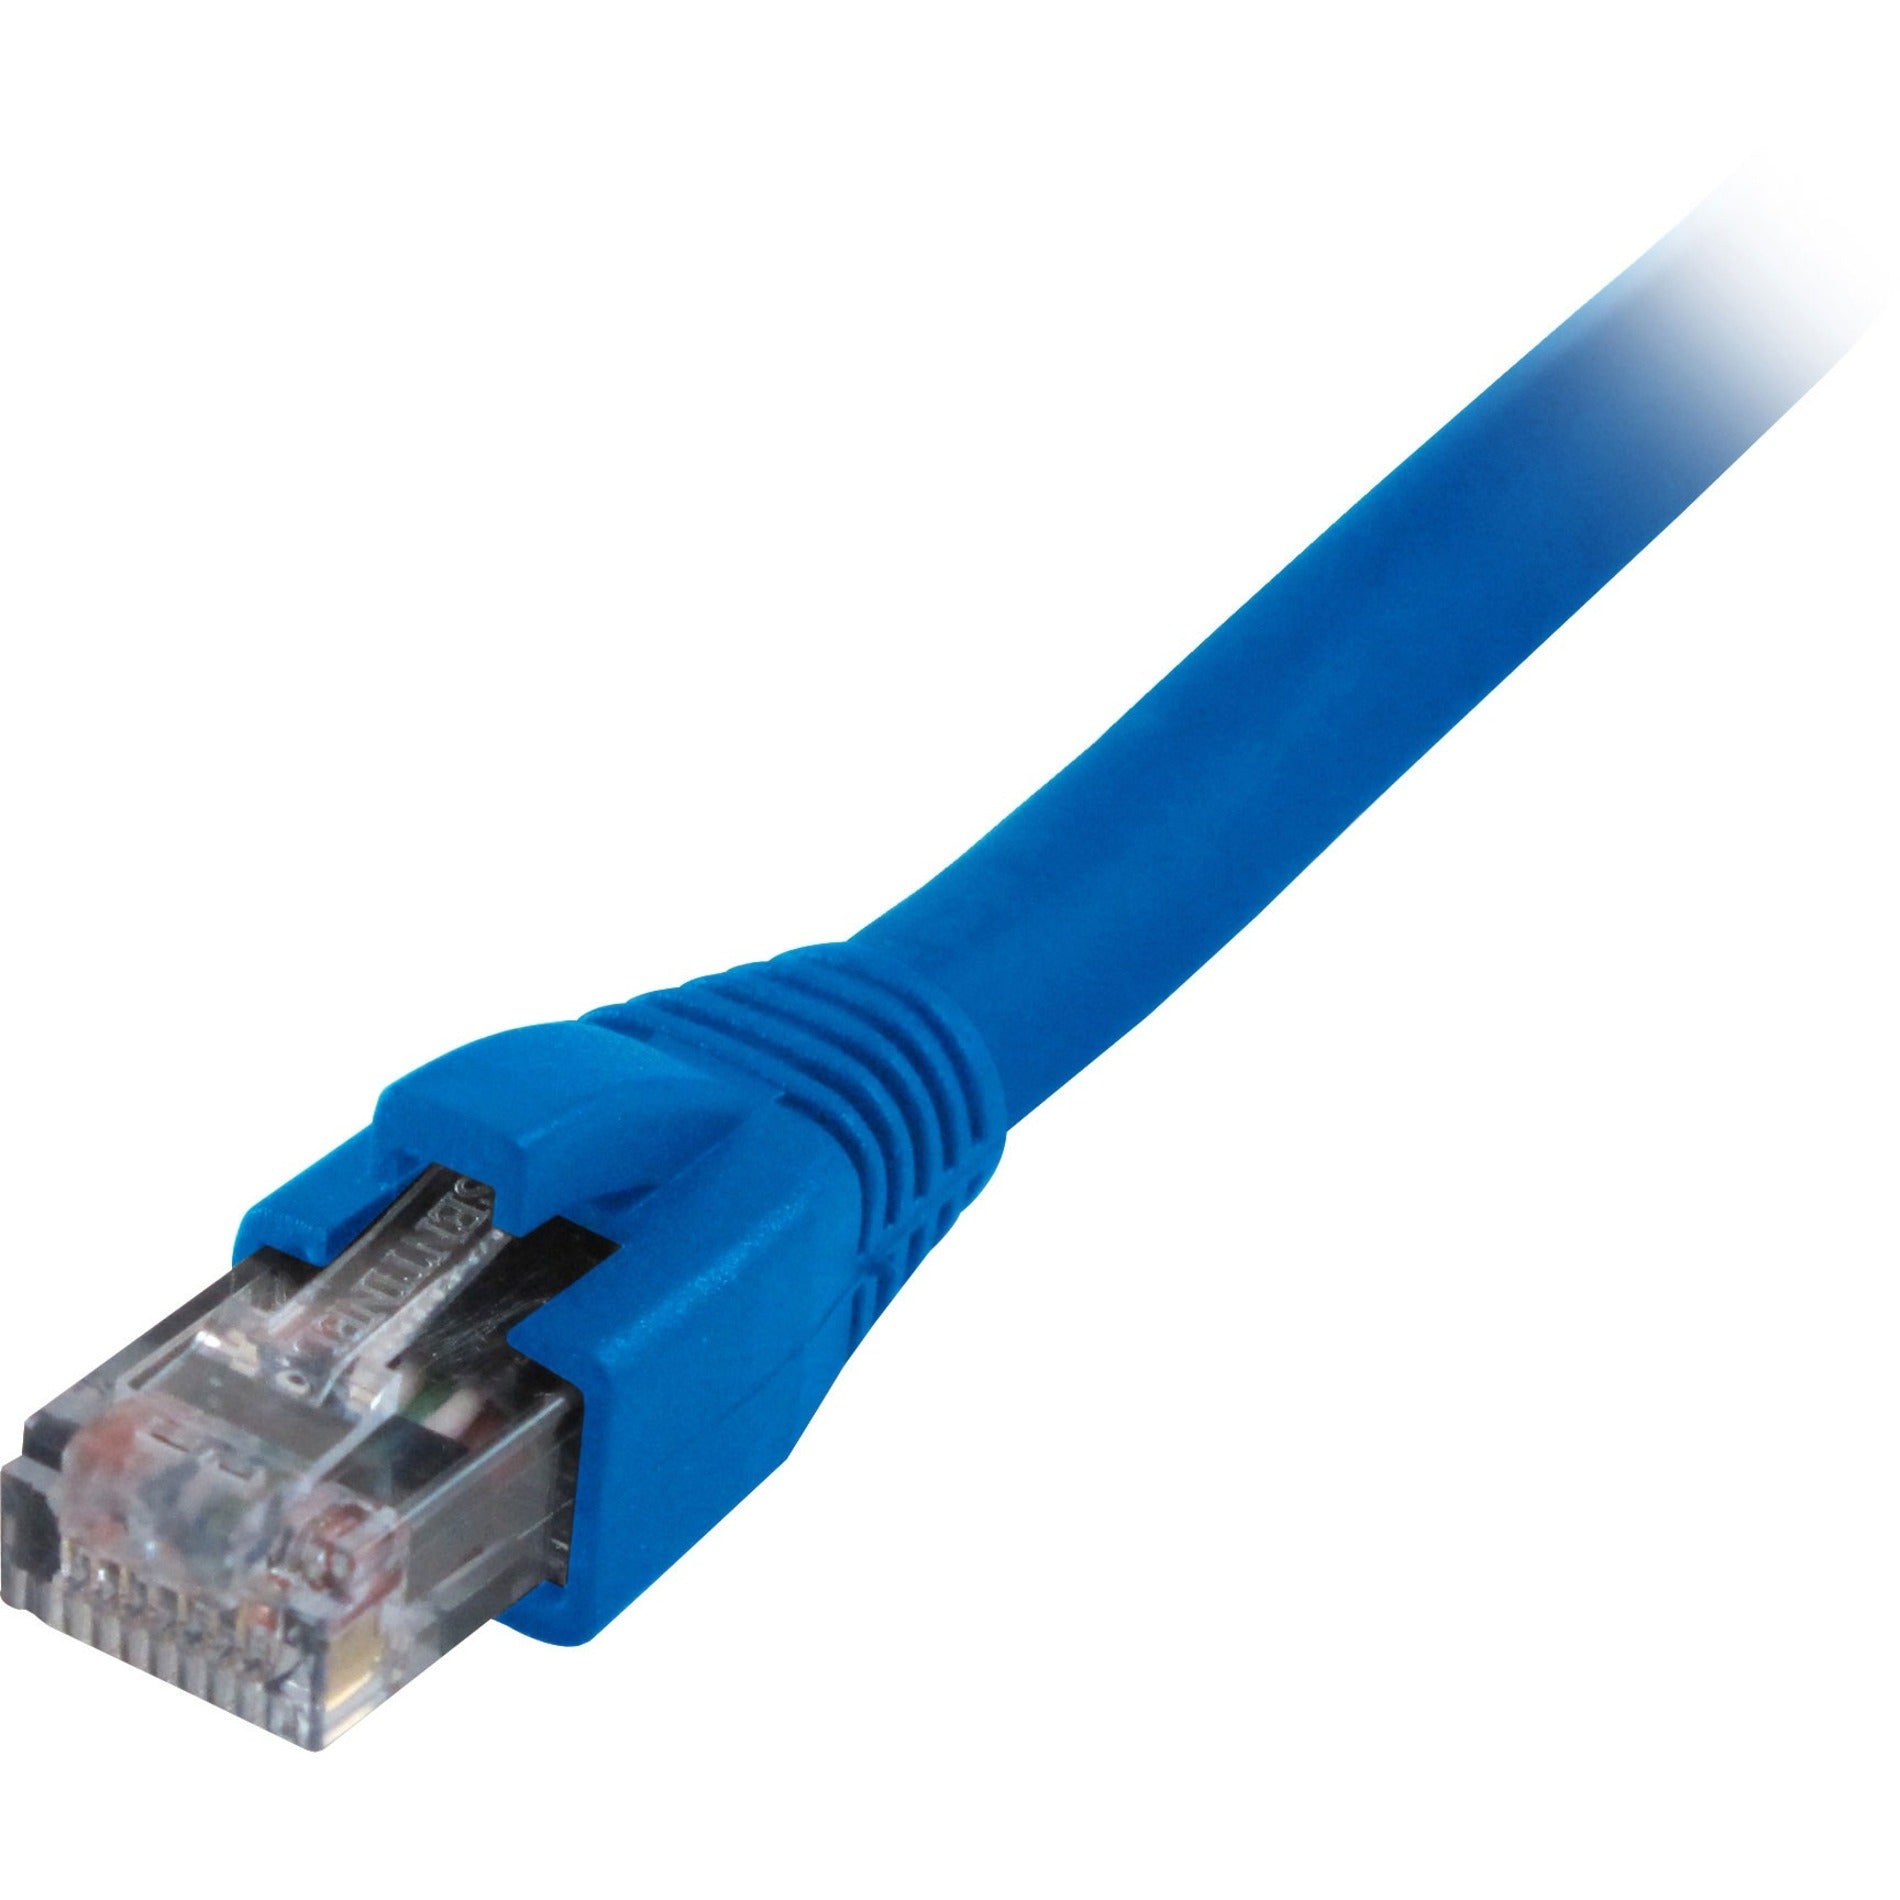 Comprehensive CAT6-50BLU Cat6 550 Mhz Snagless Patch Cable 50ft Blue, Molded, Strain Relief, 1 Gbit/s Data Transfer Rate